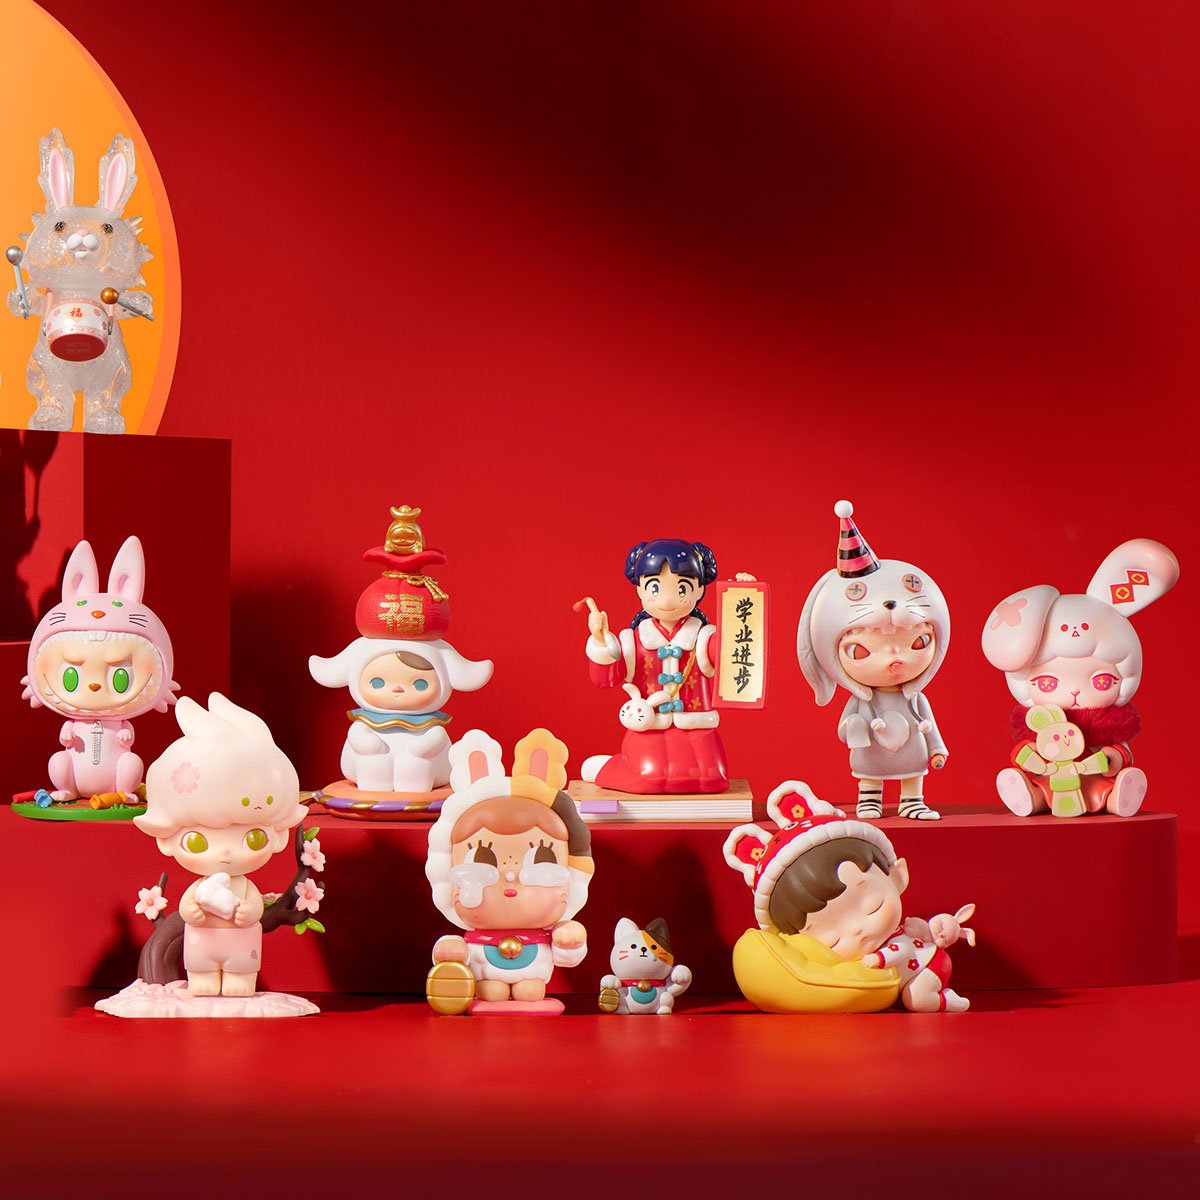 Three,Two,One!Happy Chinese New Year Series | Blind Box - POP MART 